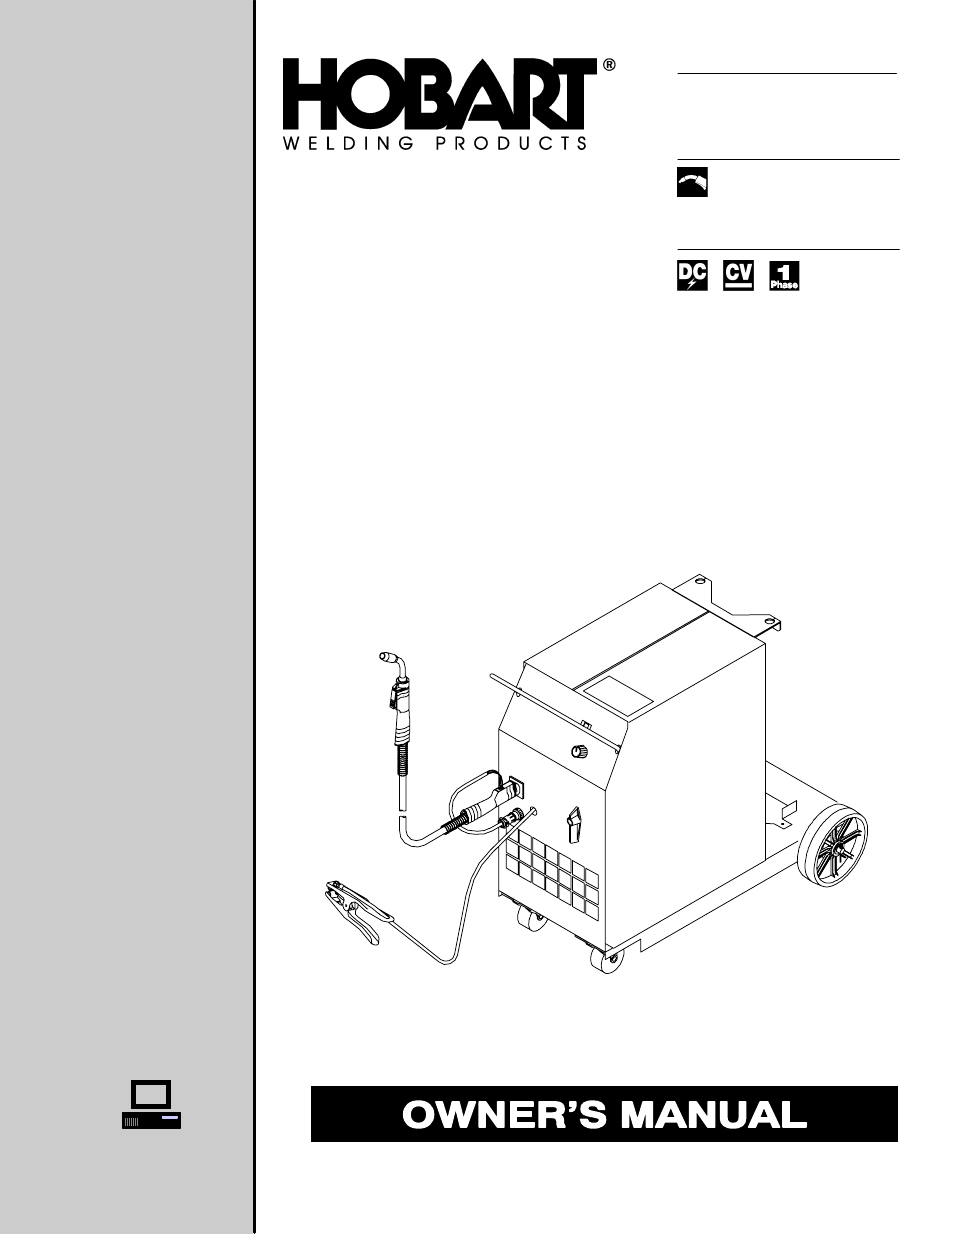 Hobart Welding Products BETA-MIG 1800 User Manual | 36 pages